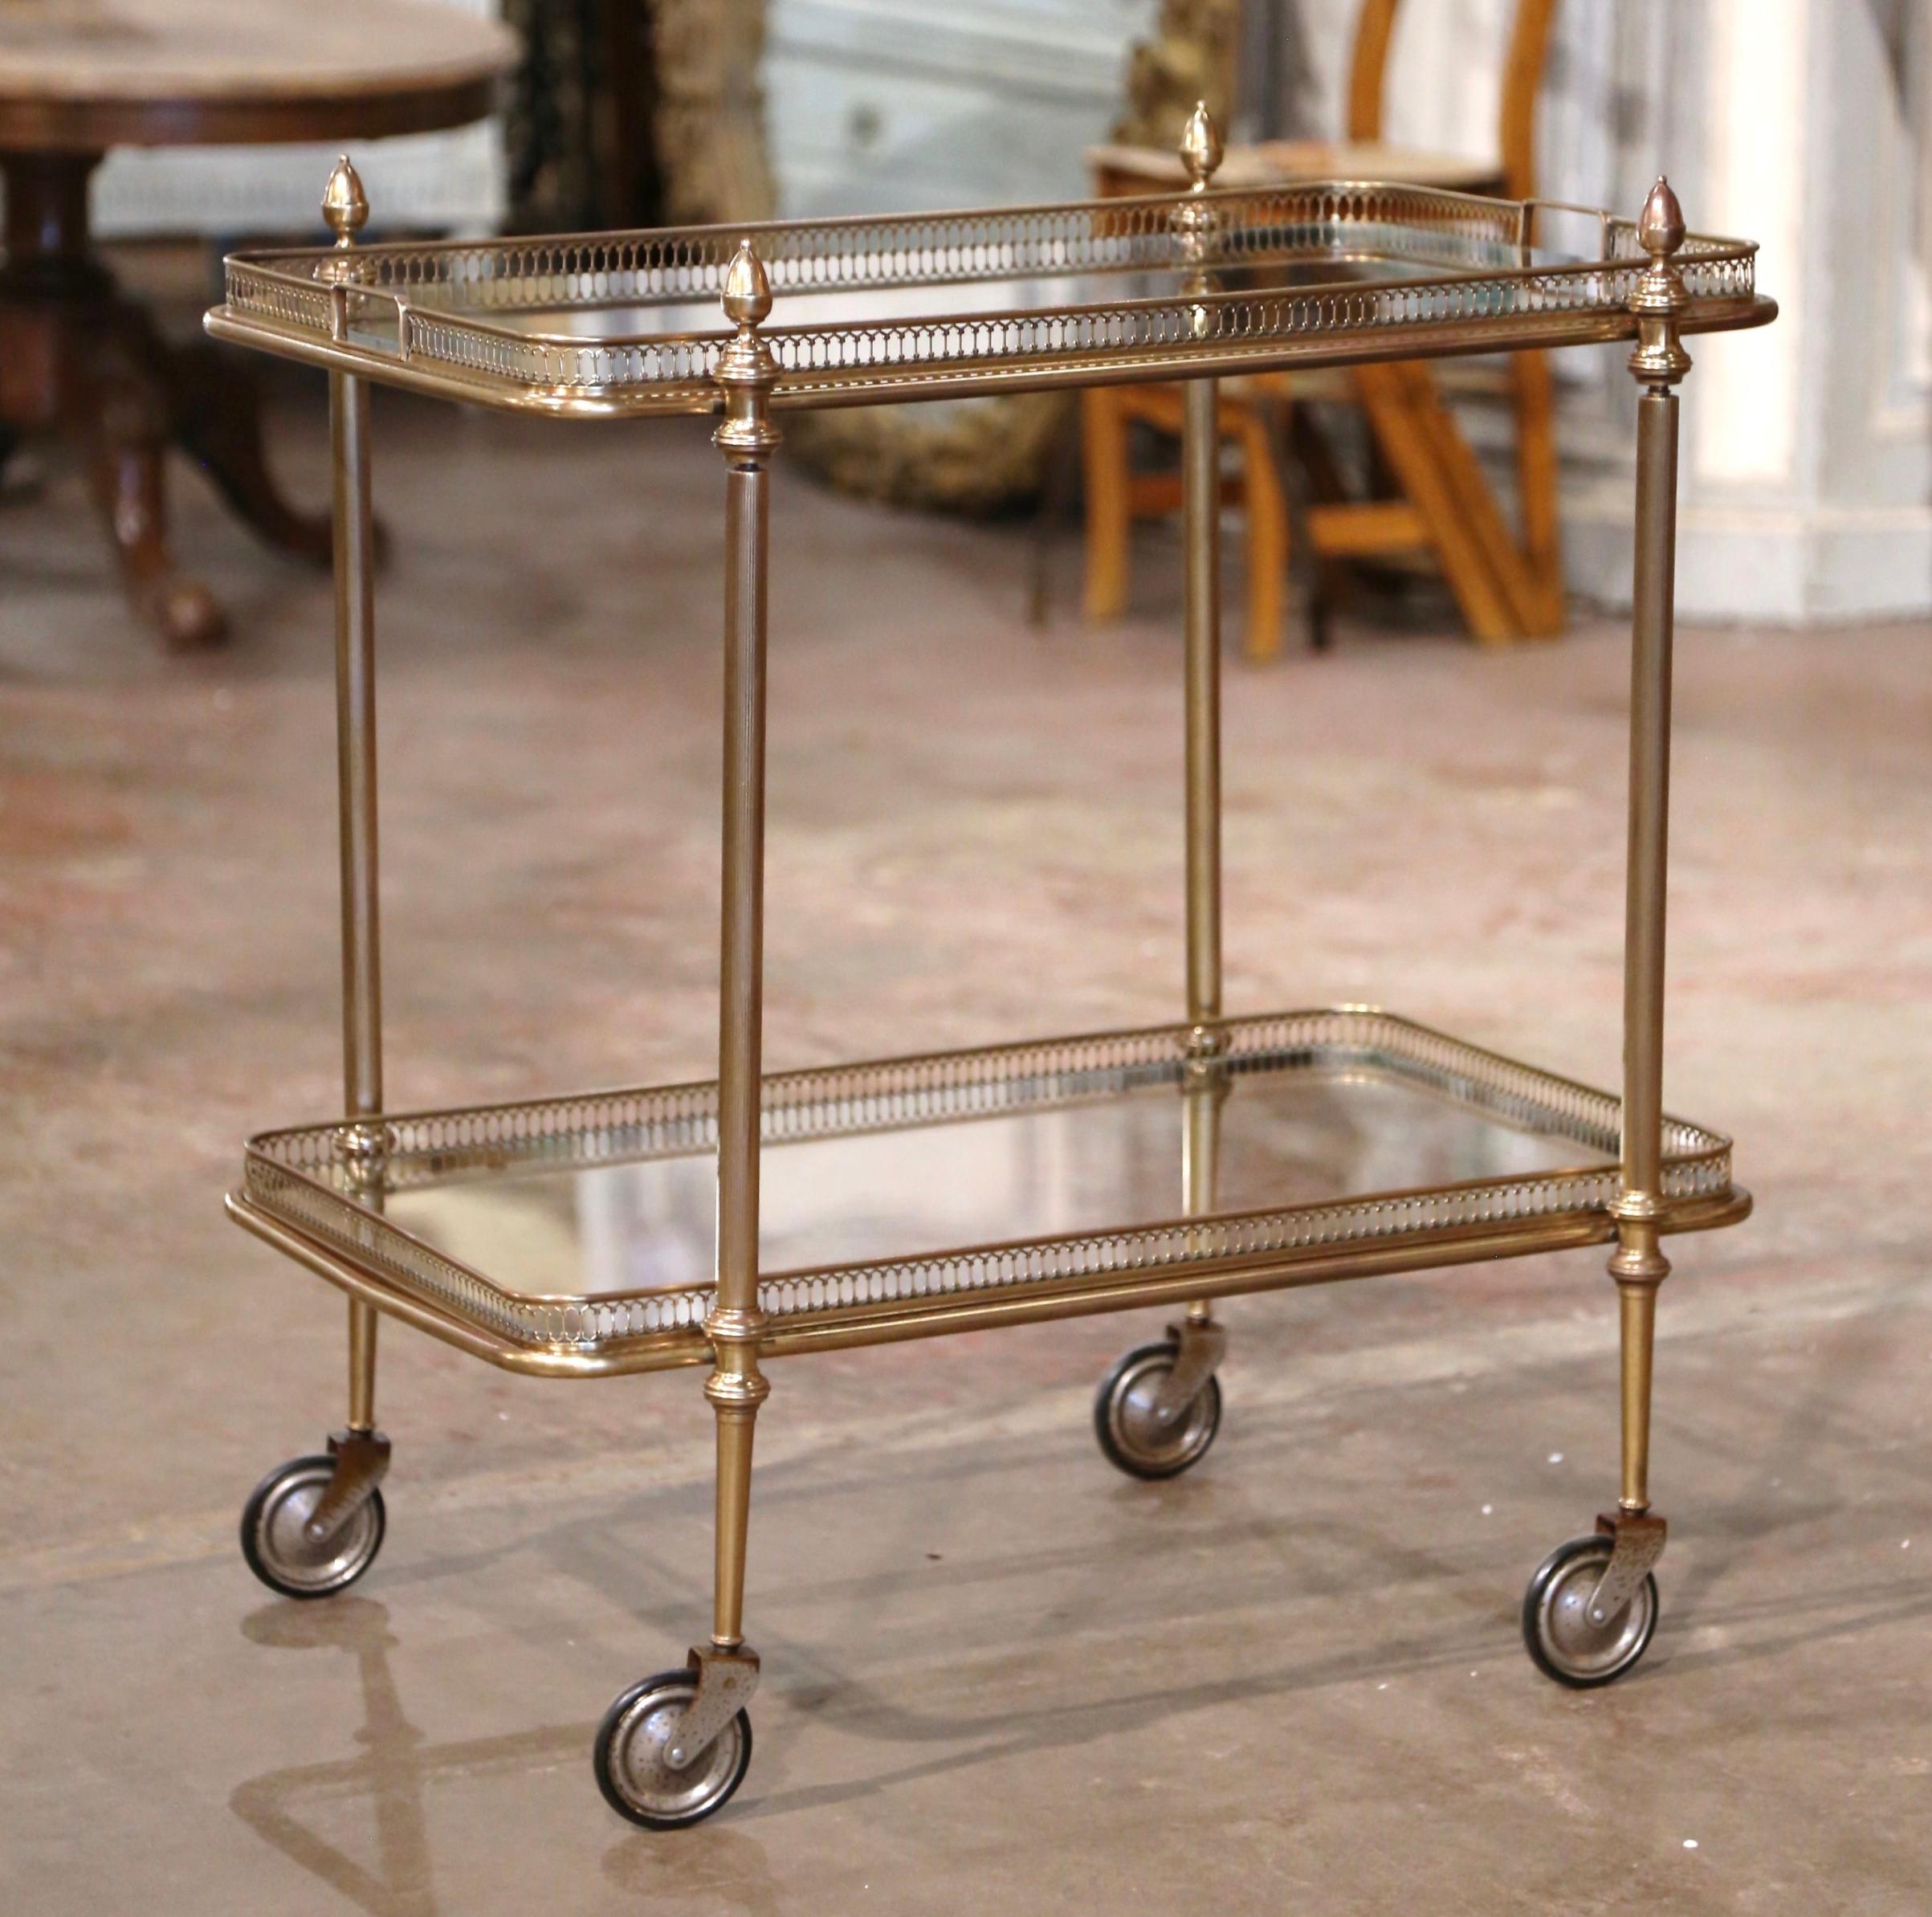 Early 20th Century French Gilt Brass Two-Tier Service Trolley Bar Cart on Wheels 4